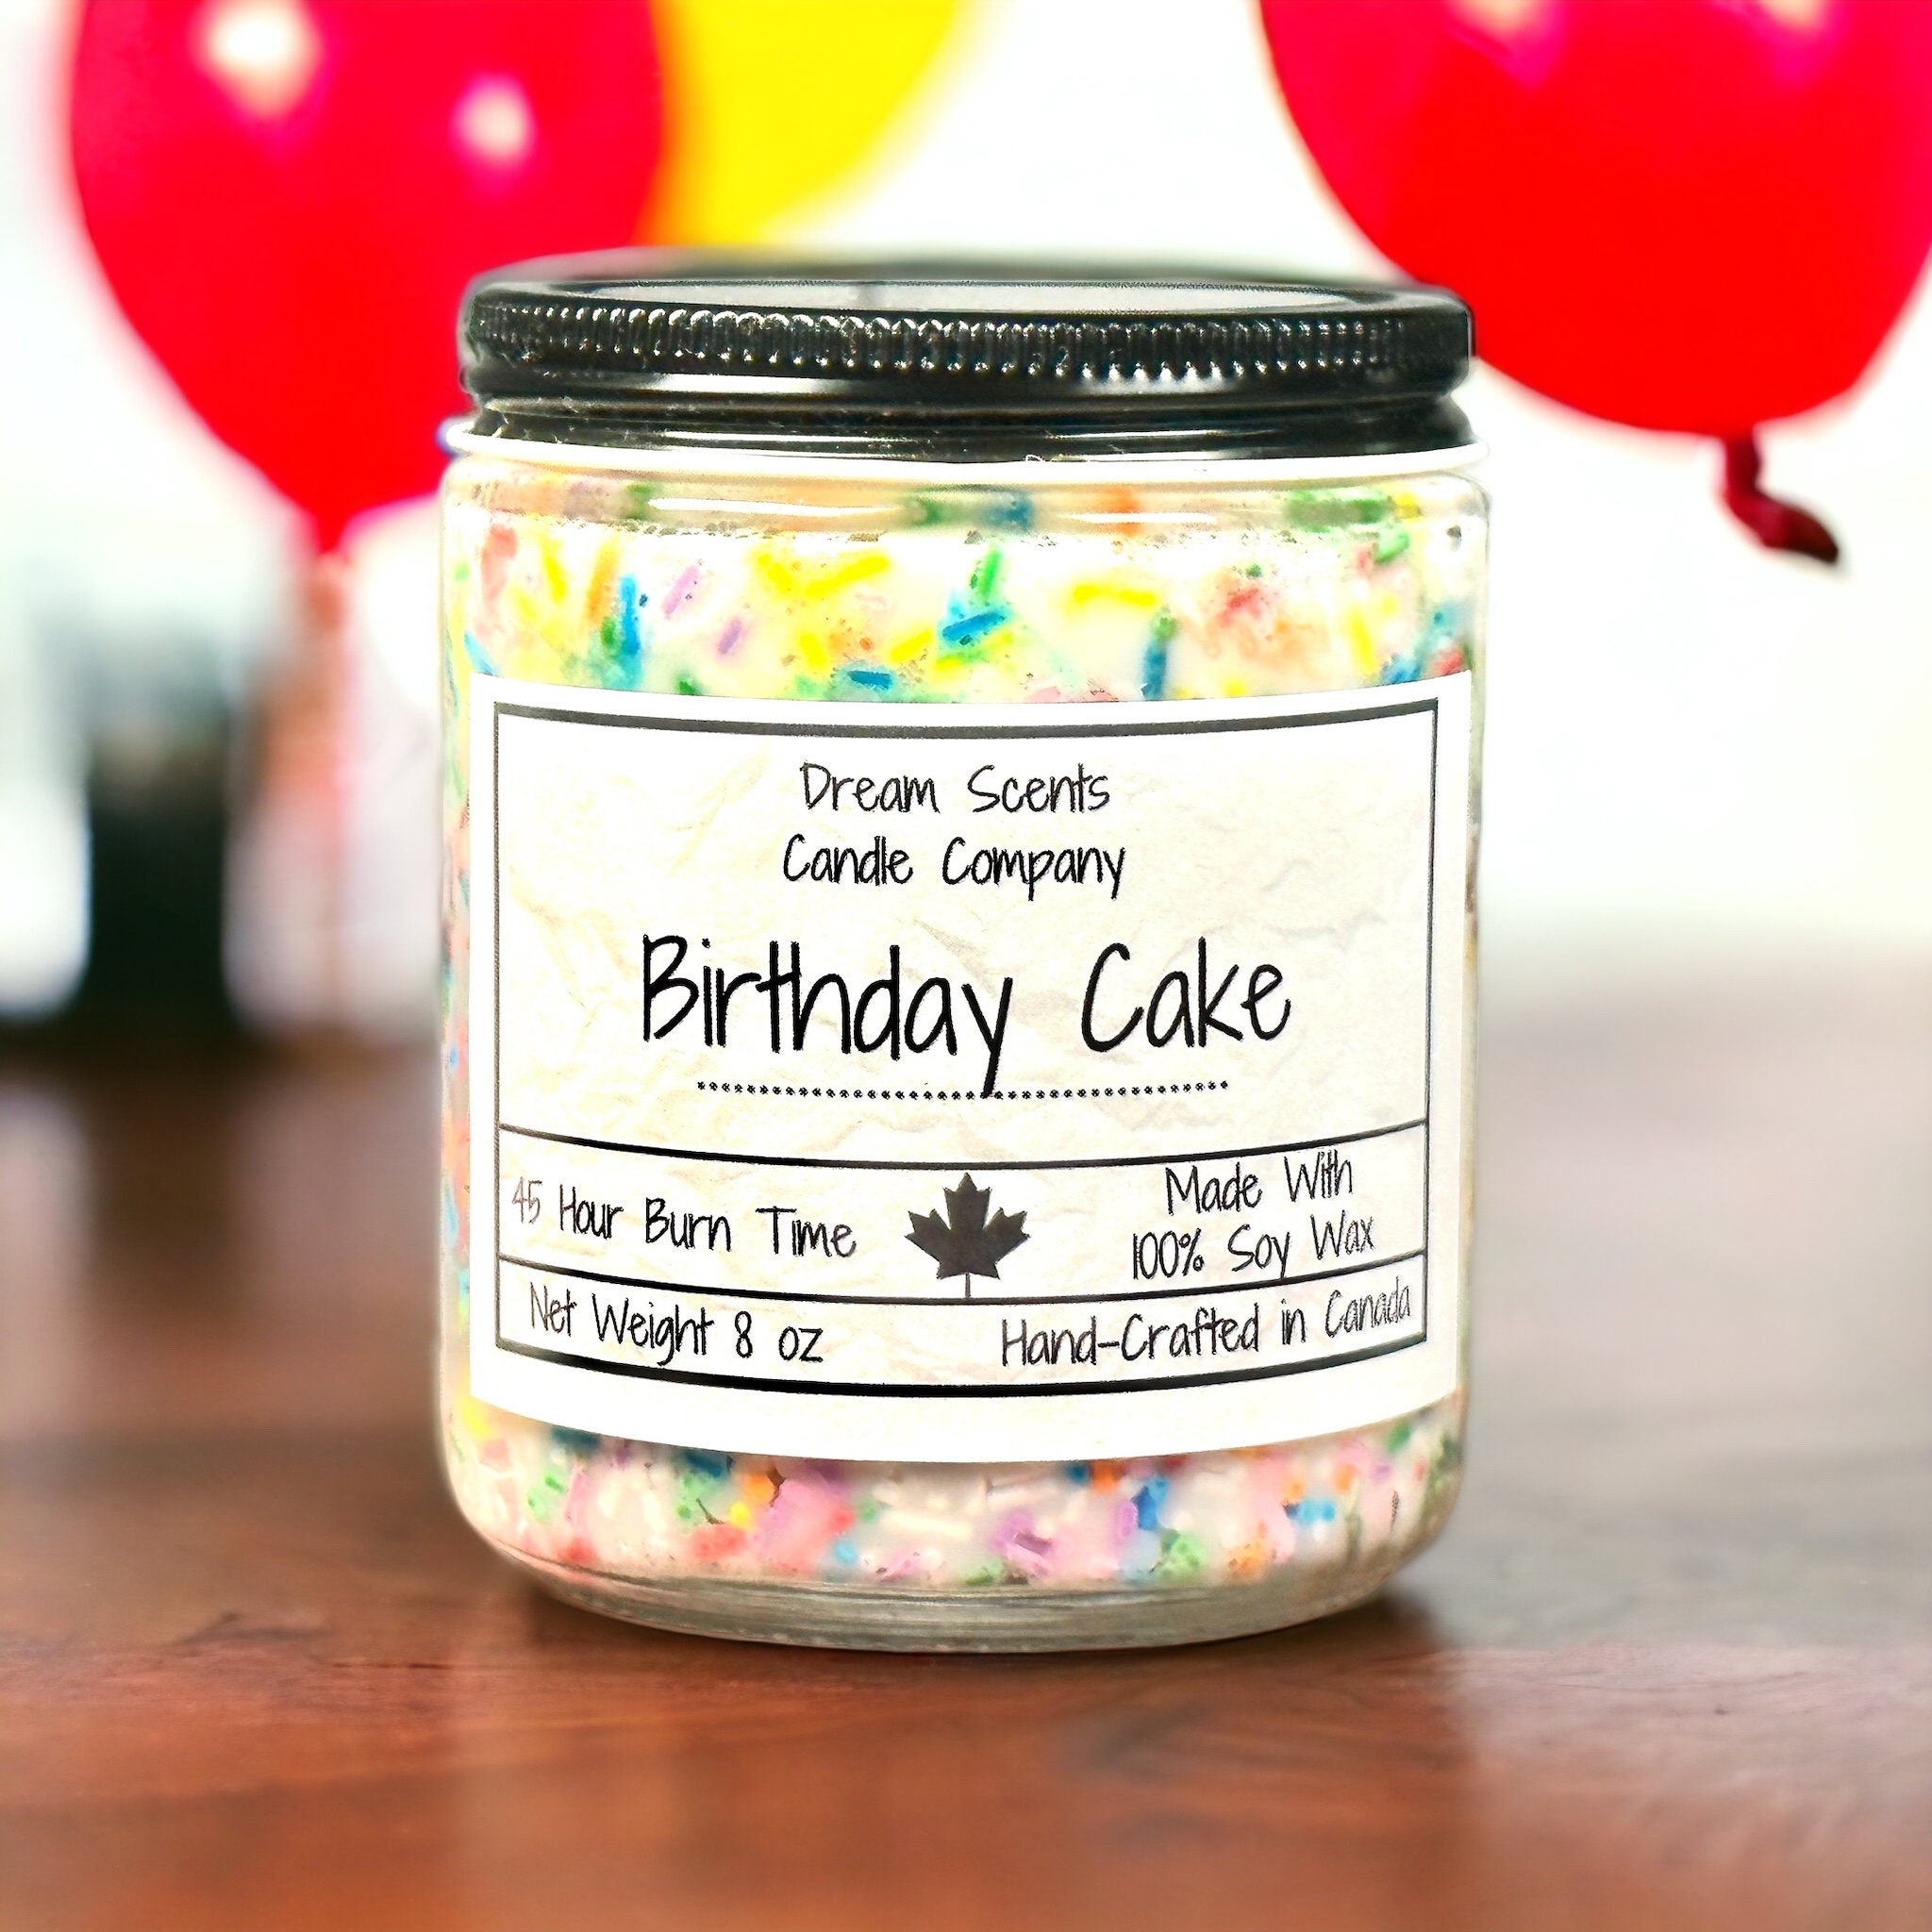 Birthday Cake Scented Soy Candle, Best Birthday Gifts, Sprinkle Candles,  Birthday Gifts for Her, Best Friend Birthday Gift Idea, Party Favor 